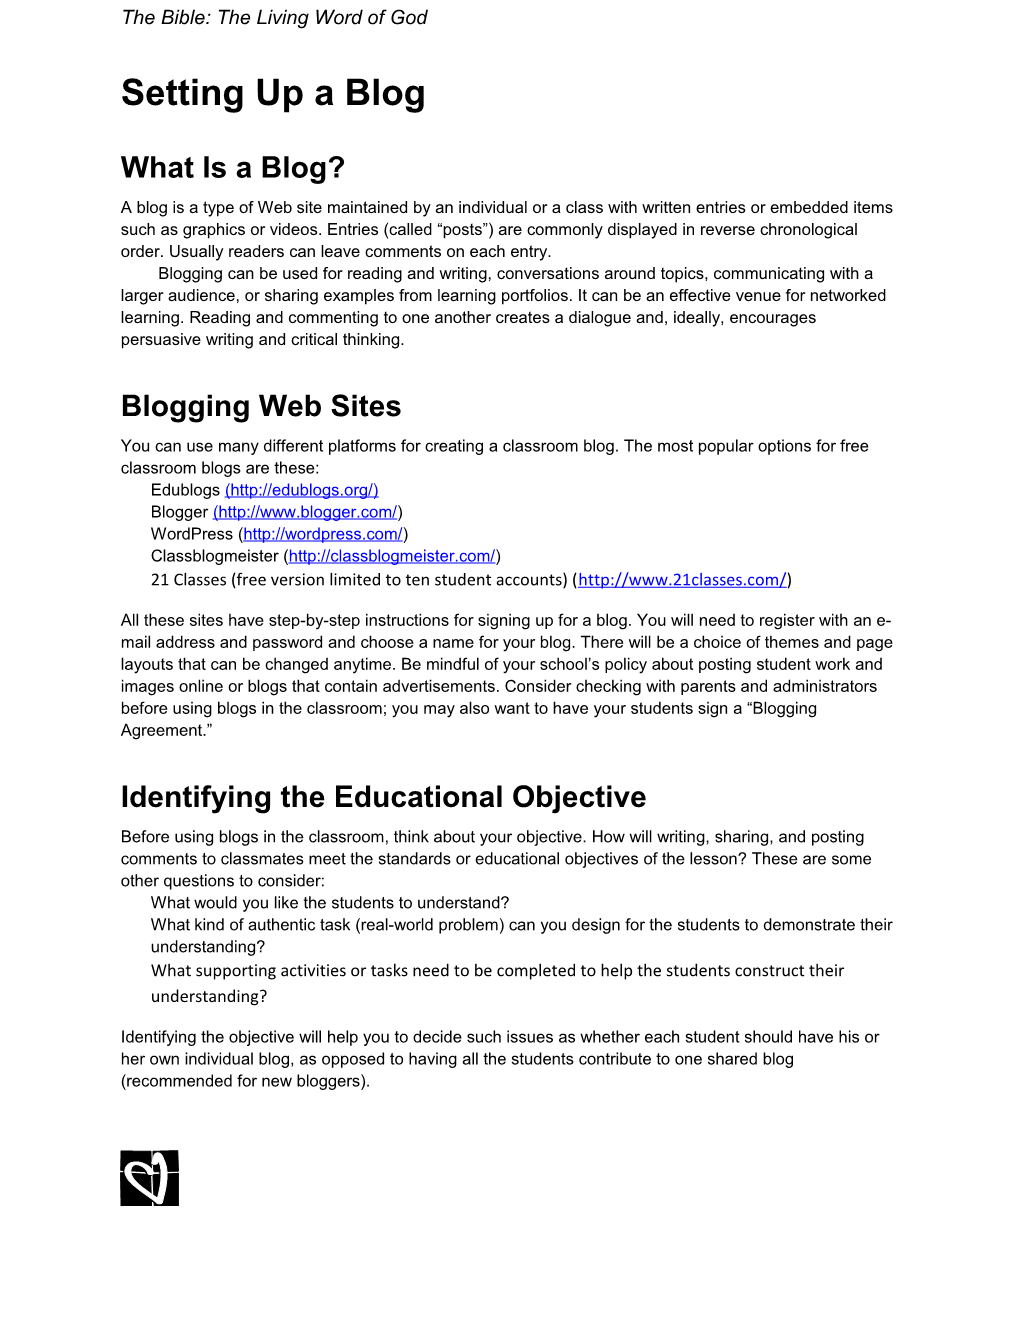 Setting up a Blogpage 1